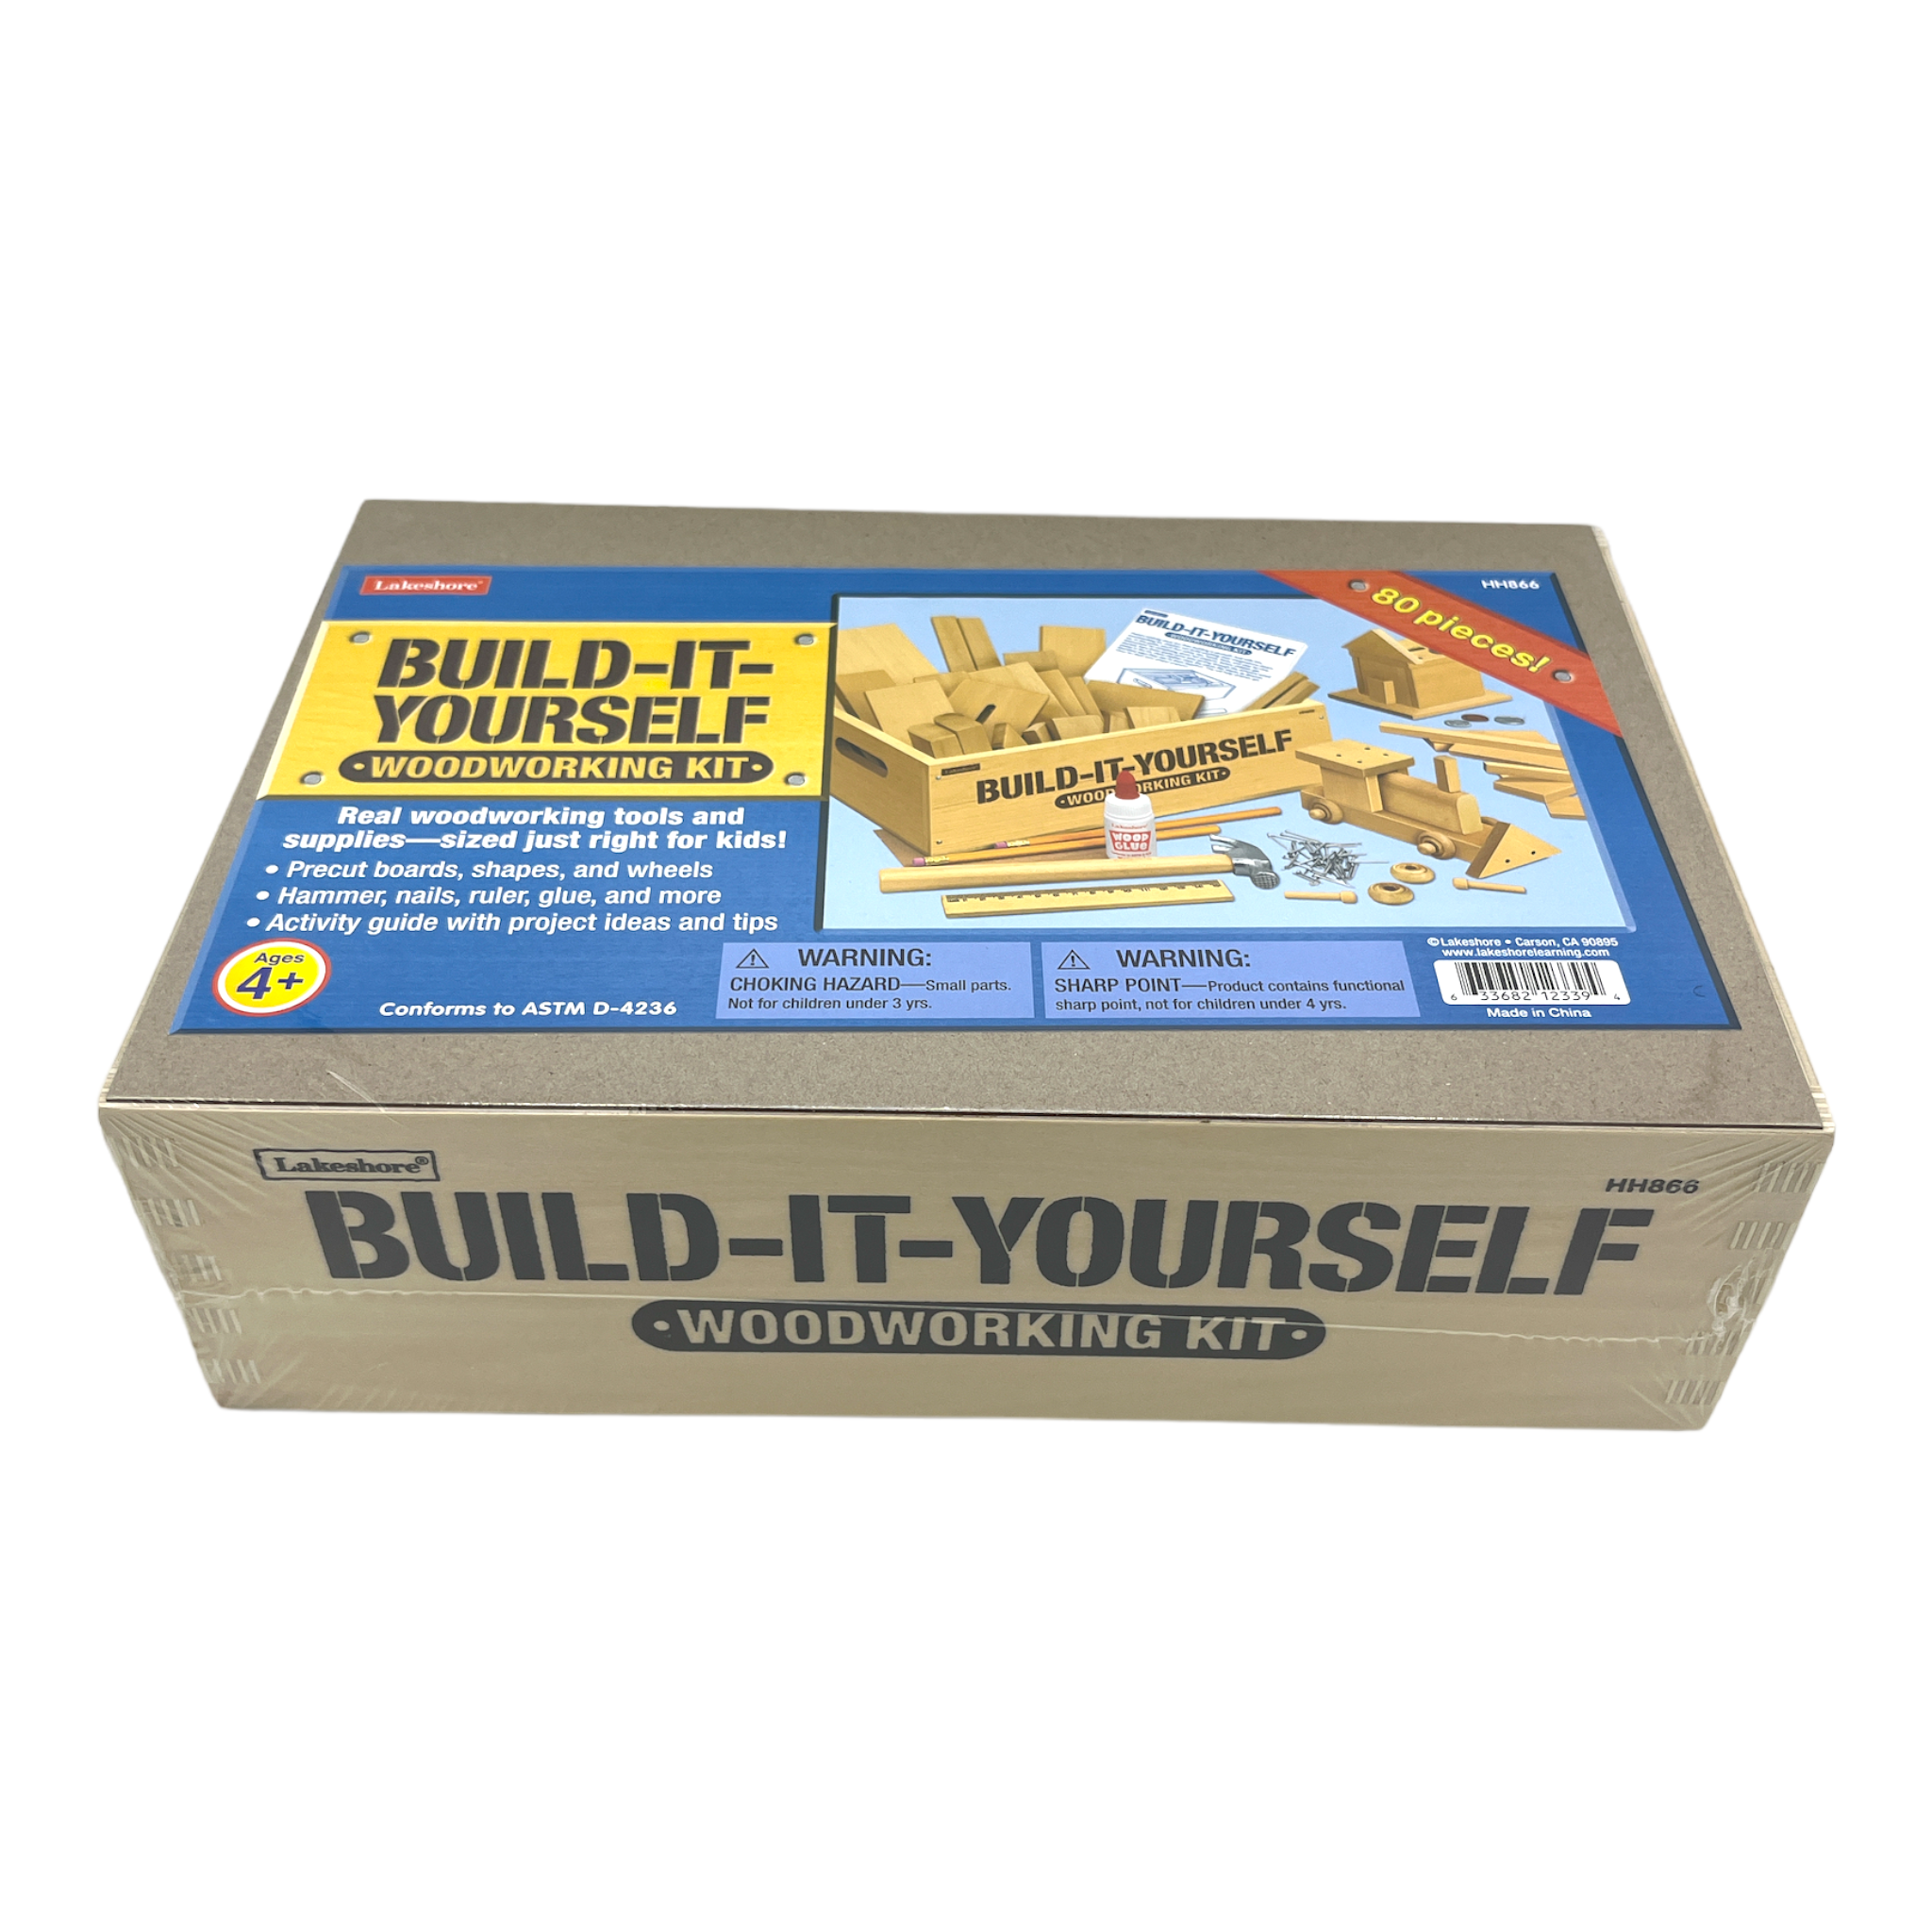 Lakeshore Build-It-Yourself Woodworking Kit for Kids - toys